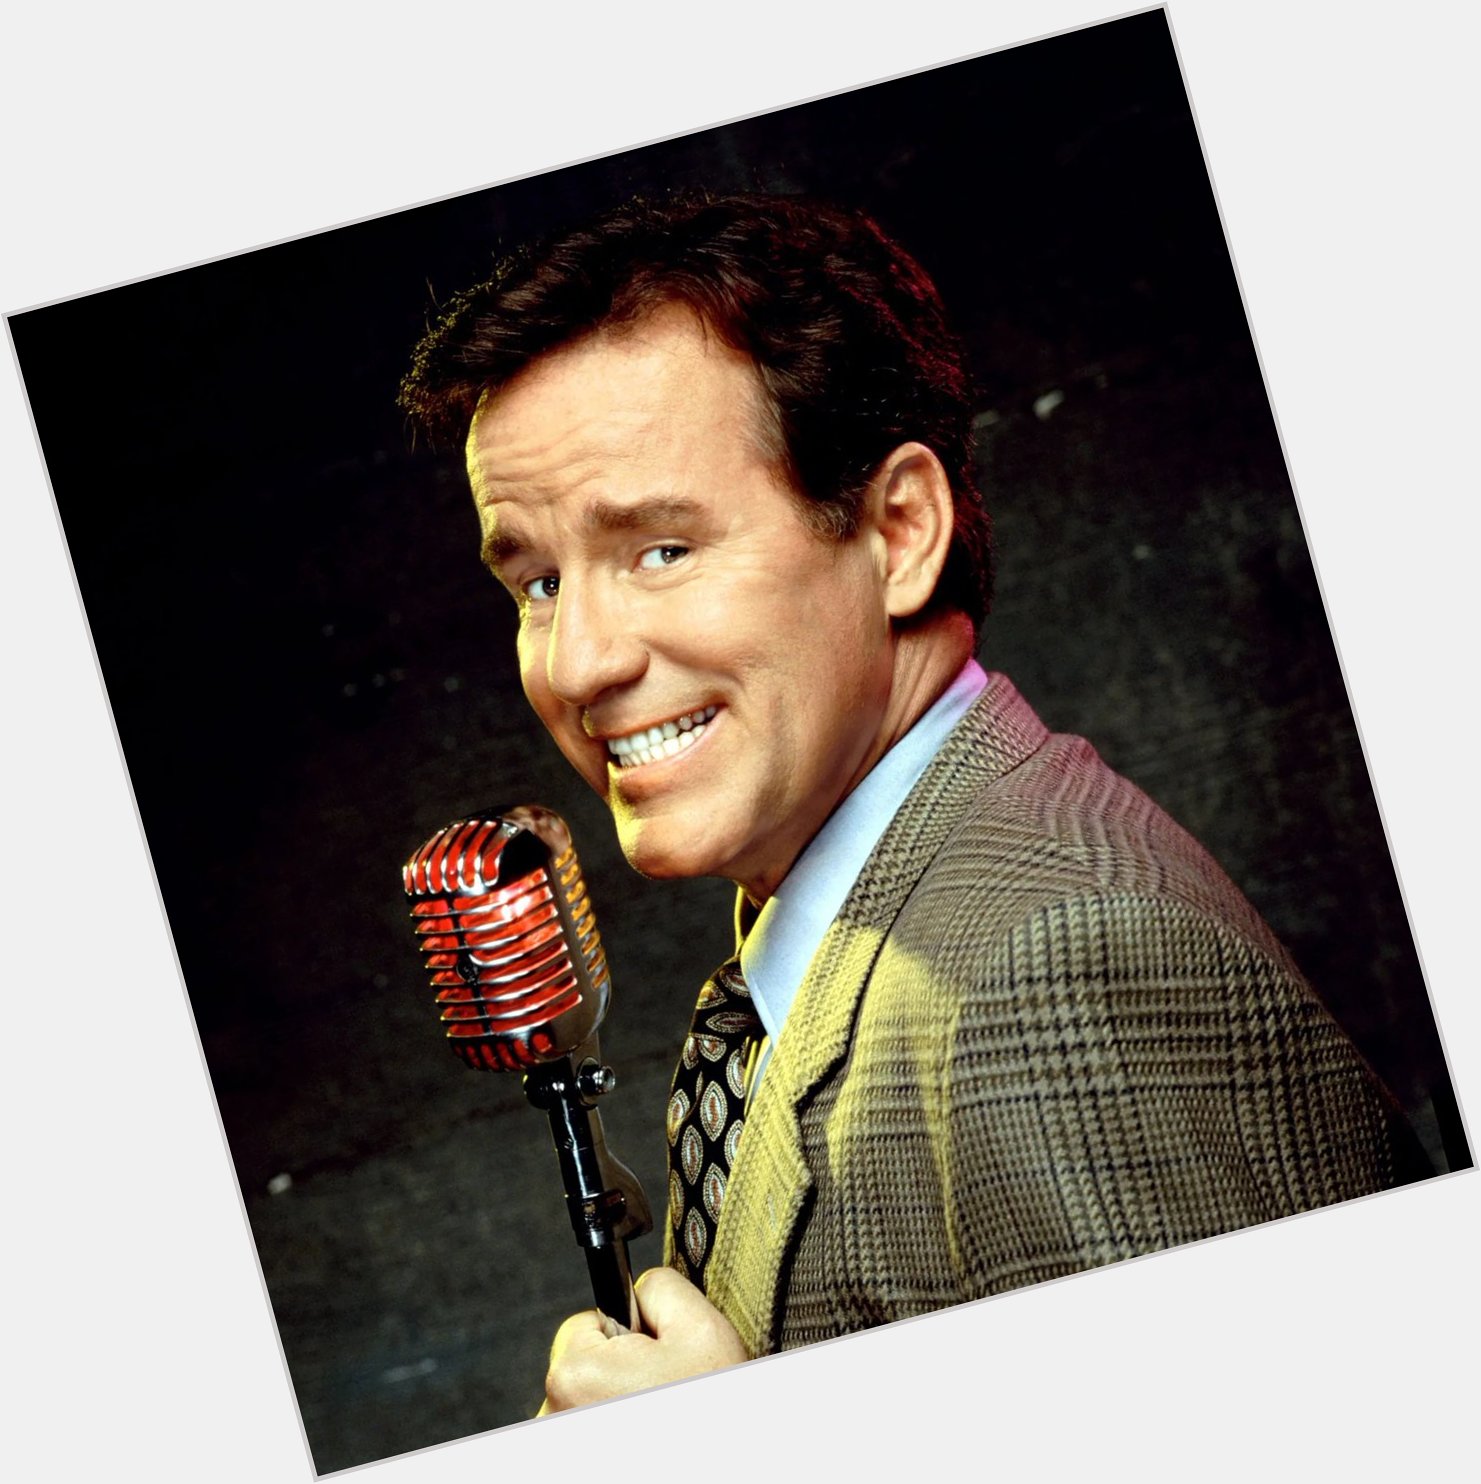 Phil Hartman was one of the greatest who was taken too soon.  Happy birthday you awesome man. 